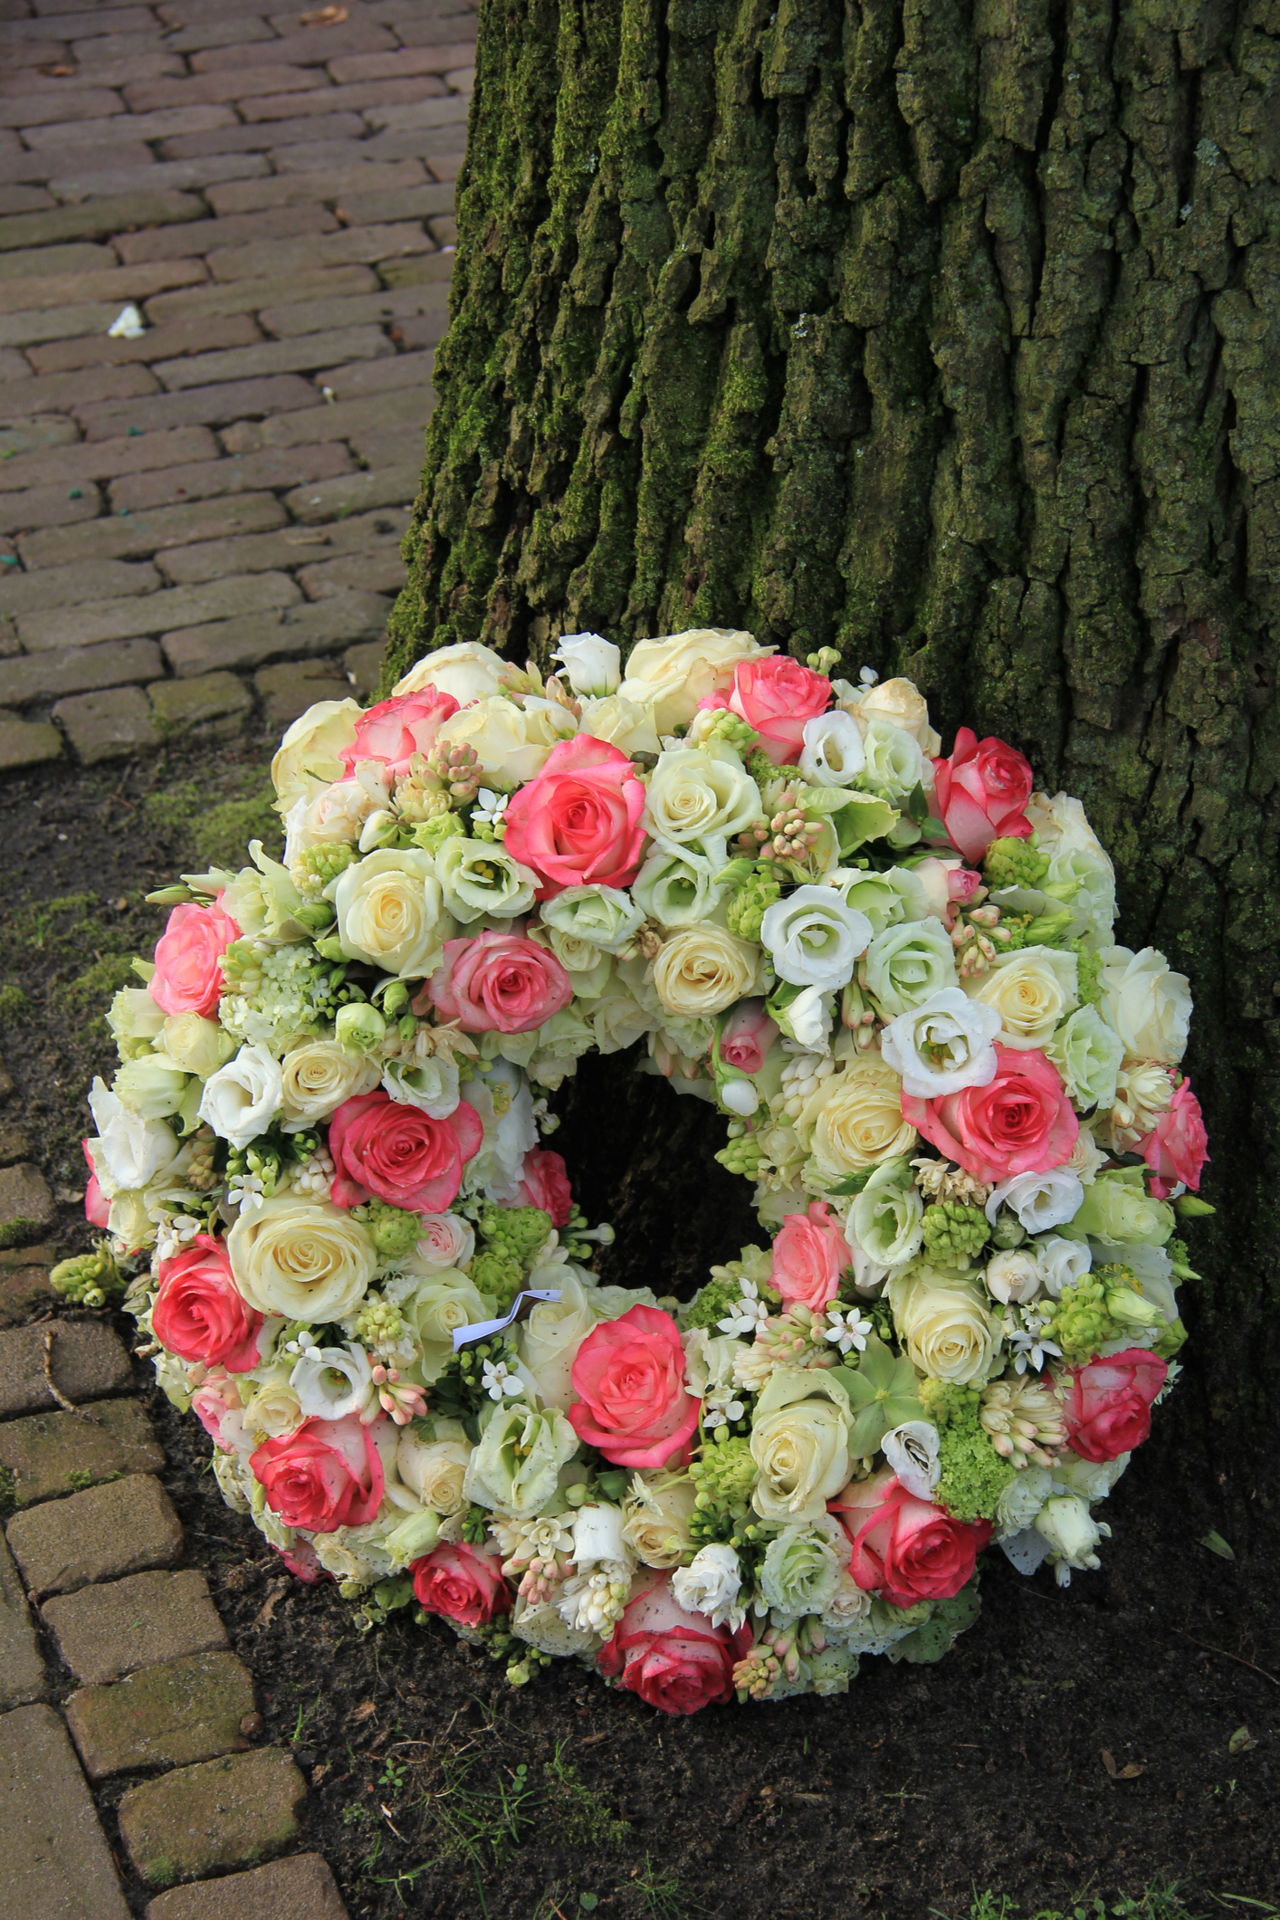 Funeral Flowers: Delivery and Arrangements